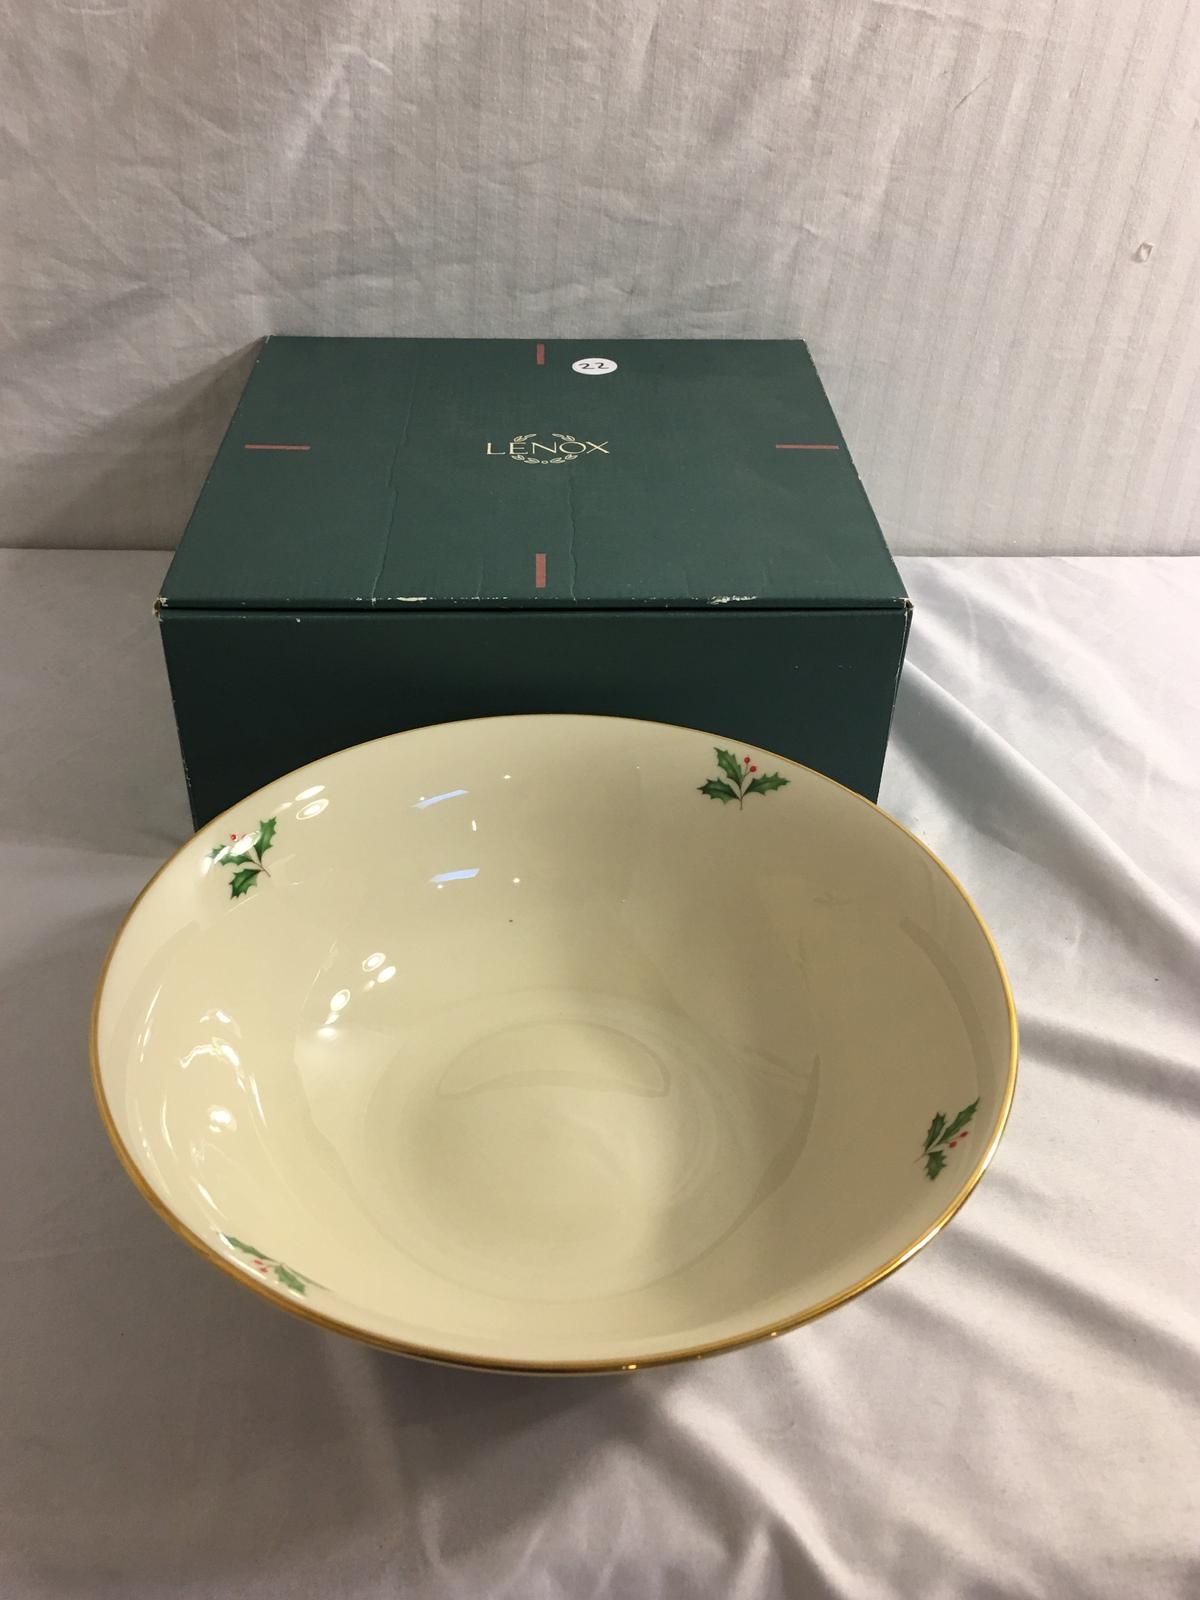 Collector Holiday Lenox Fine Ivory Round Centeroiece Bowl Box Size:9.7/8" by 9.7/8" - See Pictures